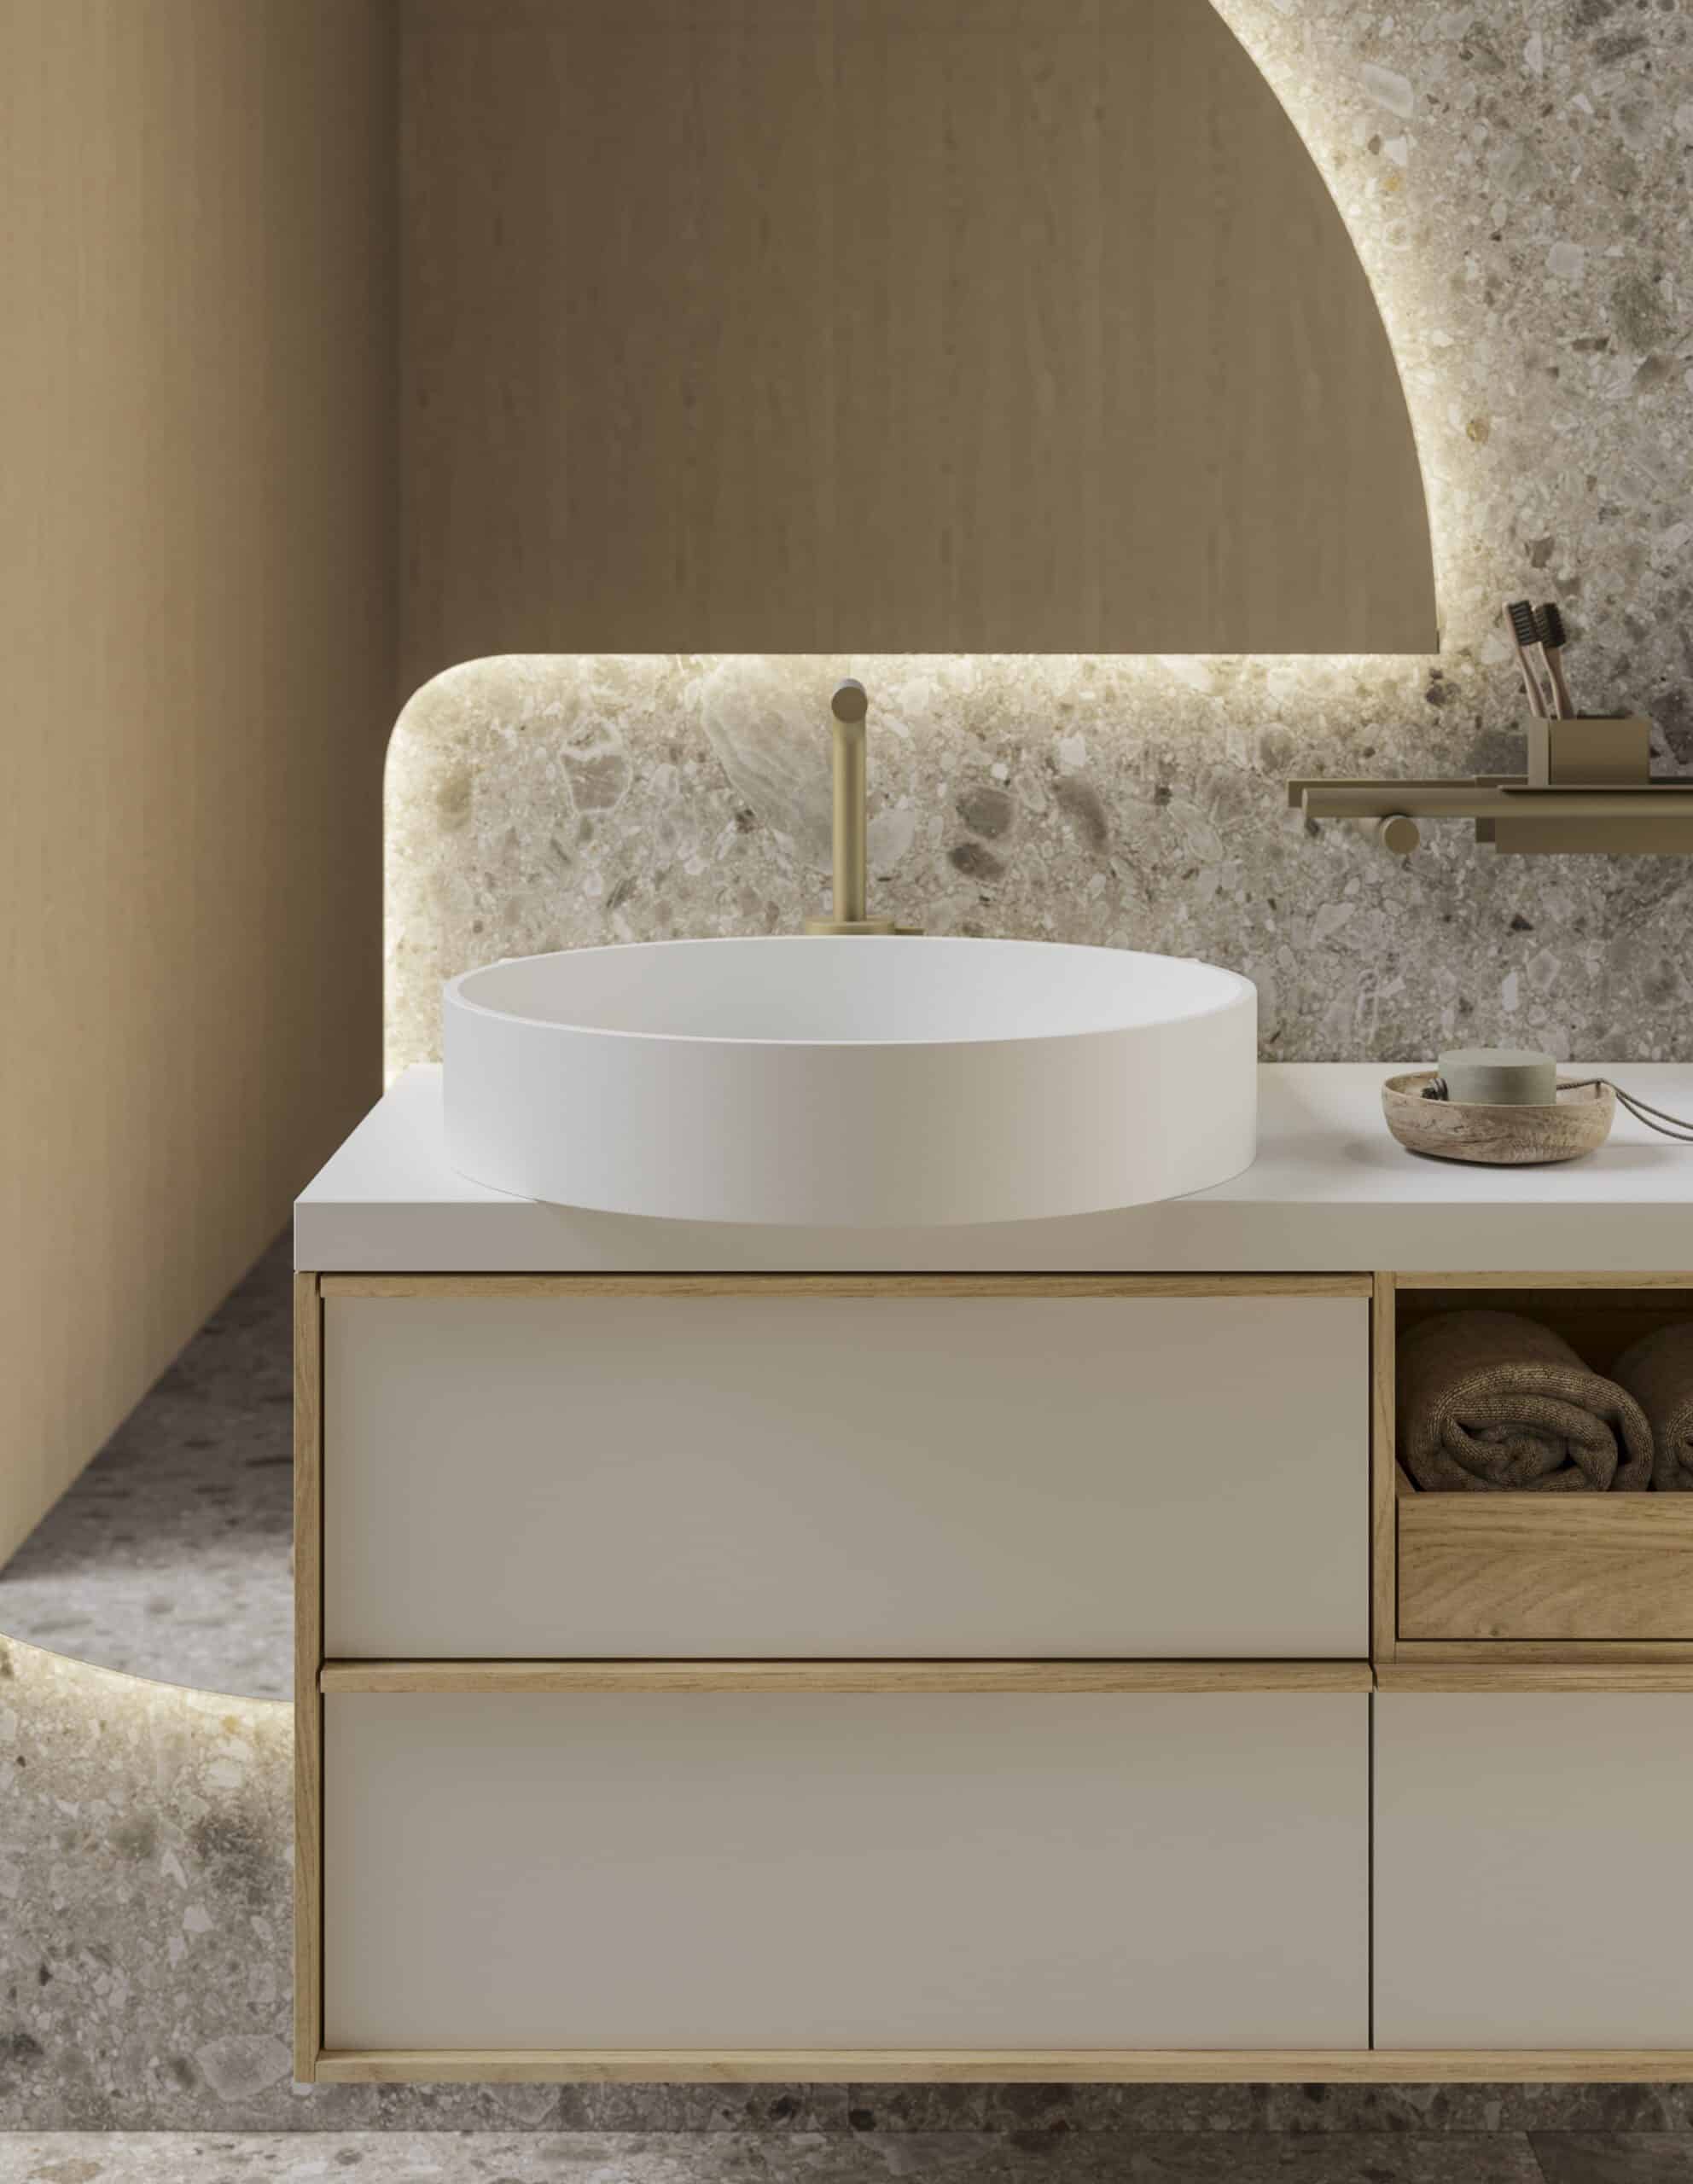 As one of Sartus’ bathroom design elements, the wooden frame (shown here in Rovere Naturale) defines the contours of the cabinets while functioning as a minimalist handle.